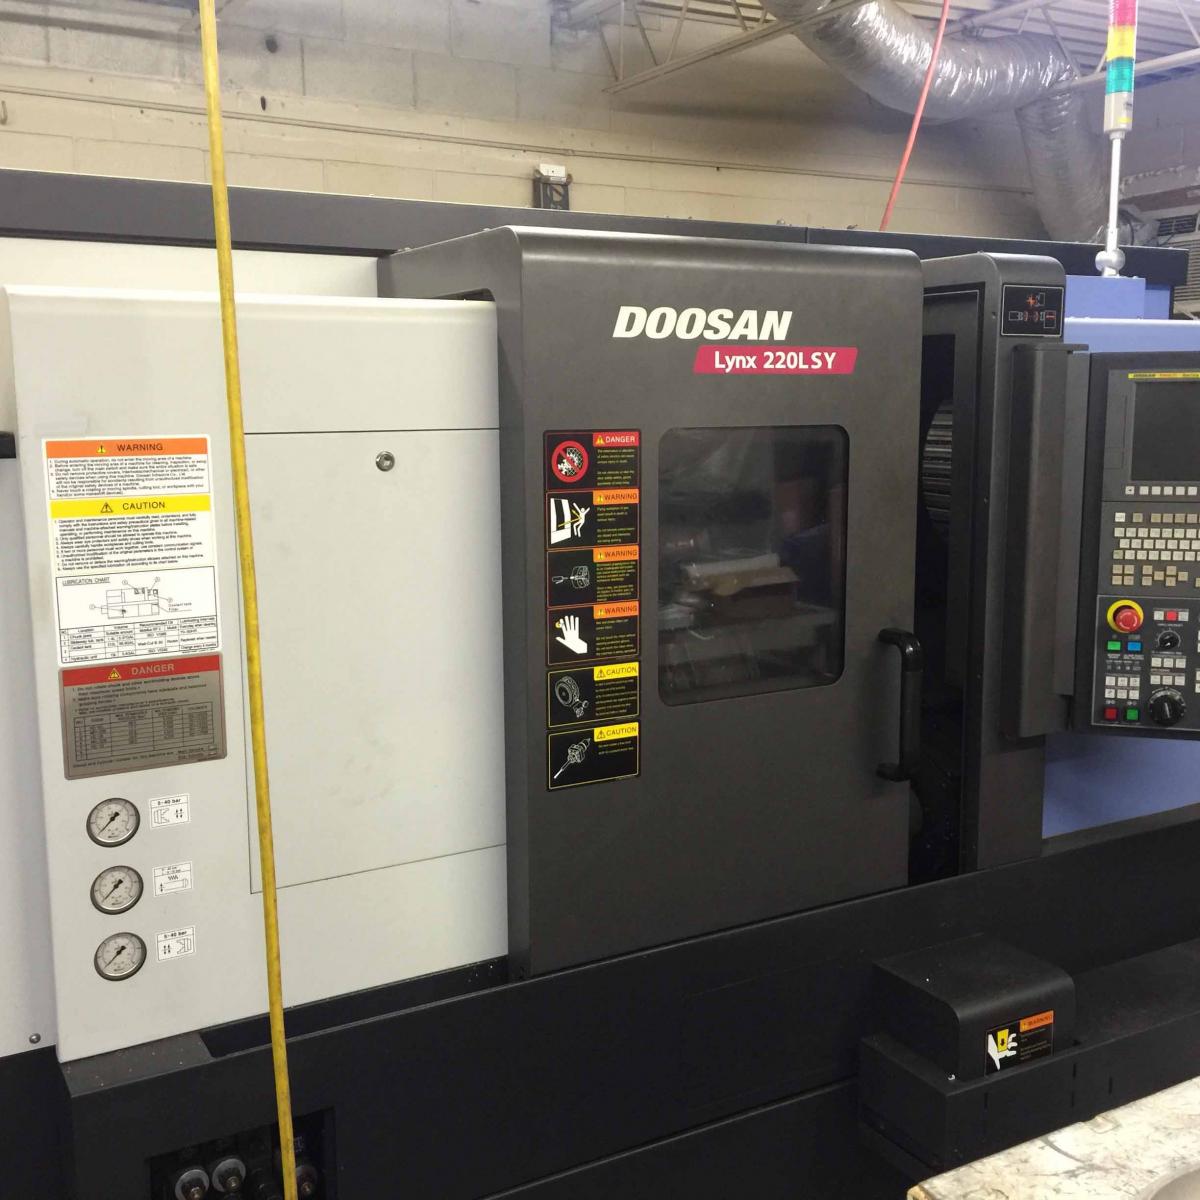 DOOSAN MECATECH LYNX 220 LSY Machine Tool used for sale price #9160208 ...